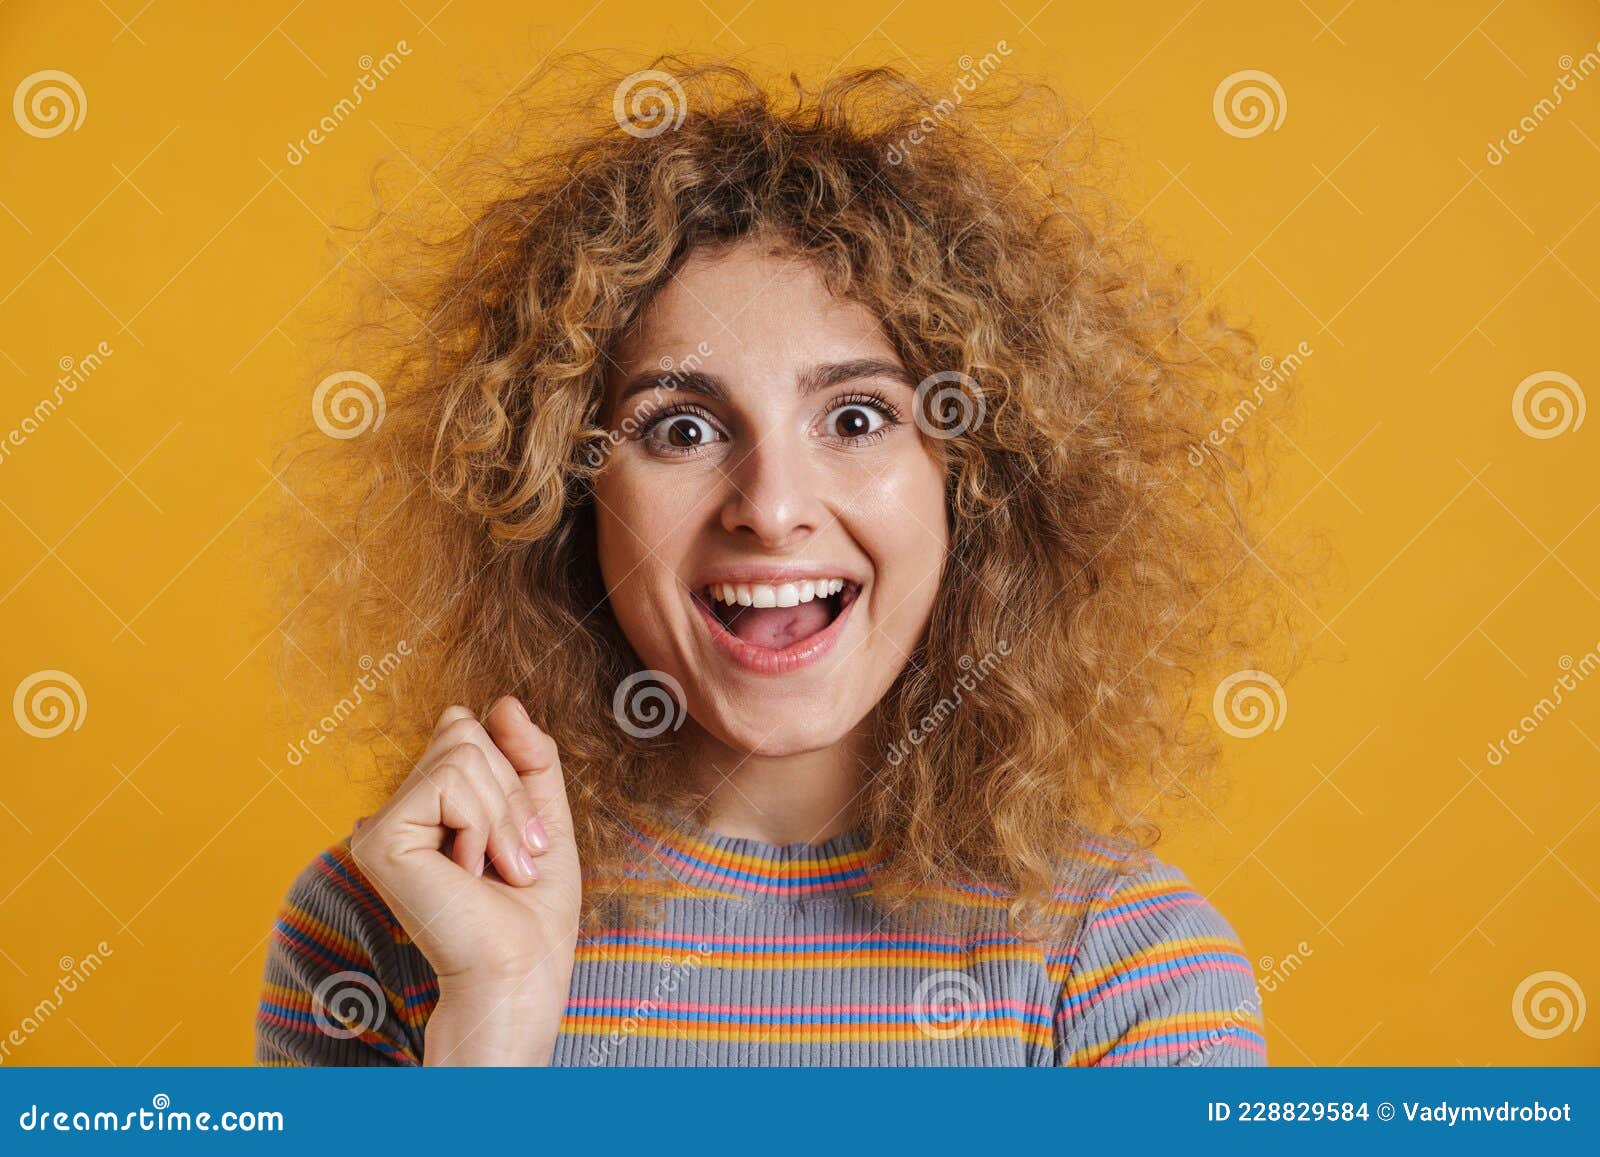 Happy Smiling Young Blonde Woman with Fizzy Hair Stock Photo - Image of ...